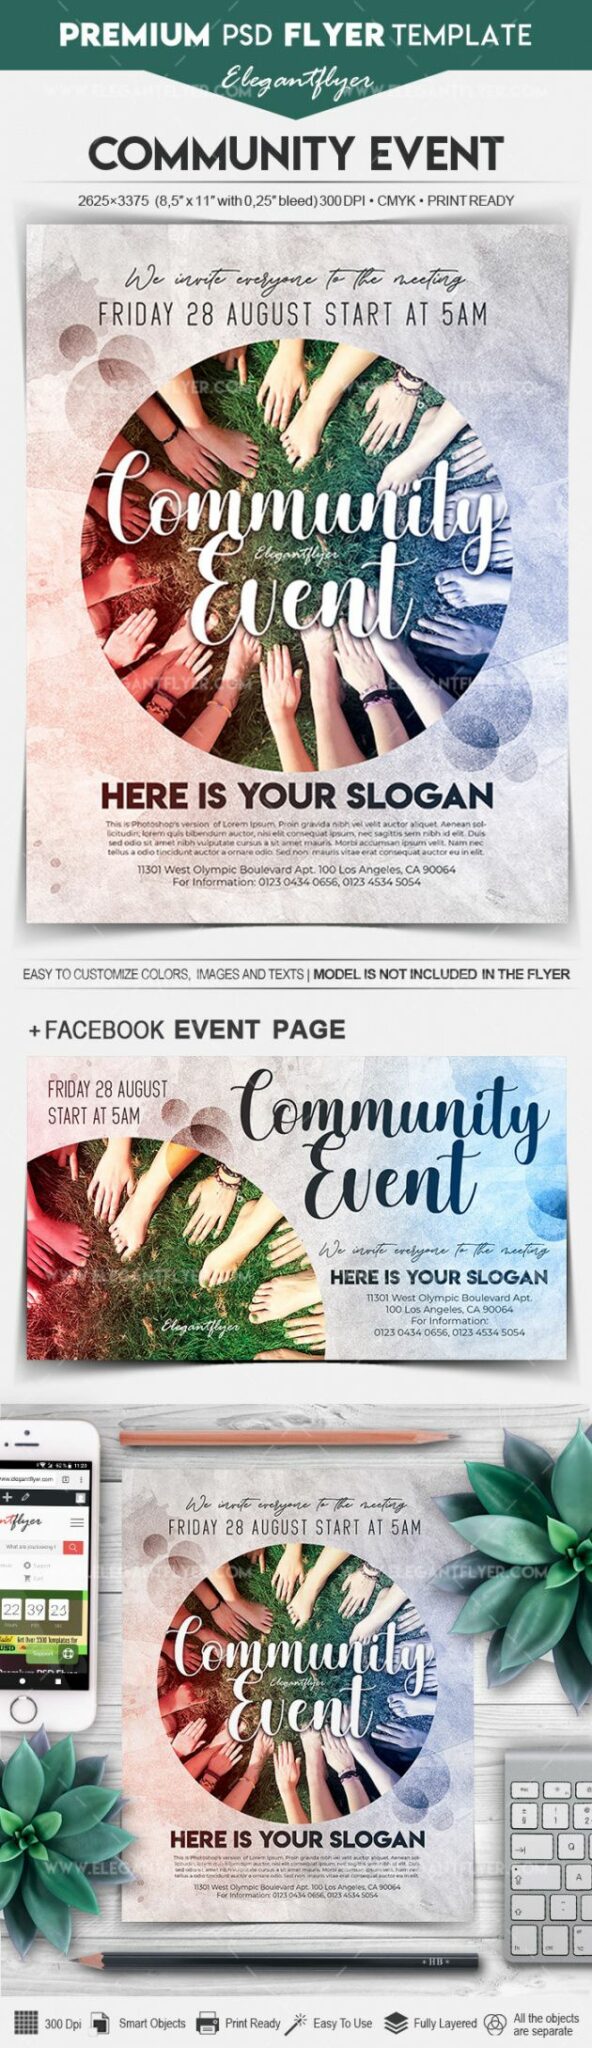 Free Community Event Flyer Psd Template Community Event Flyer Template